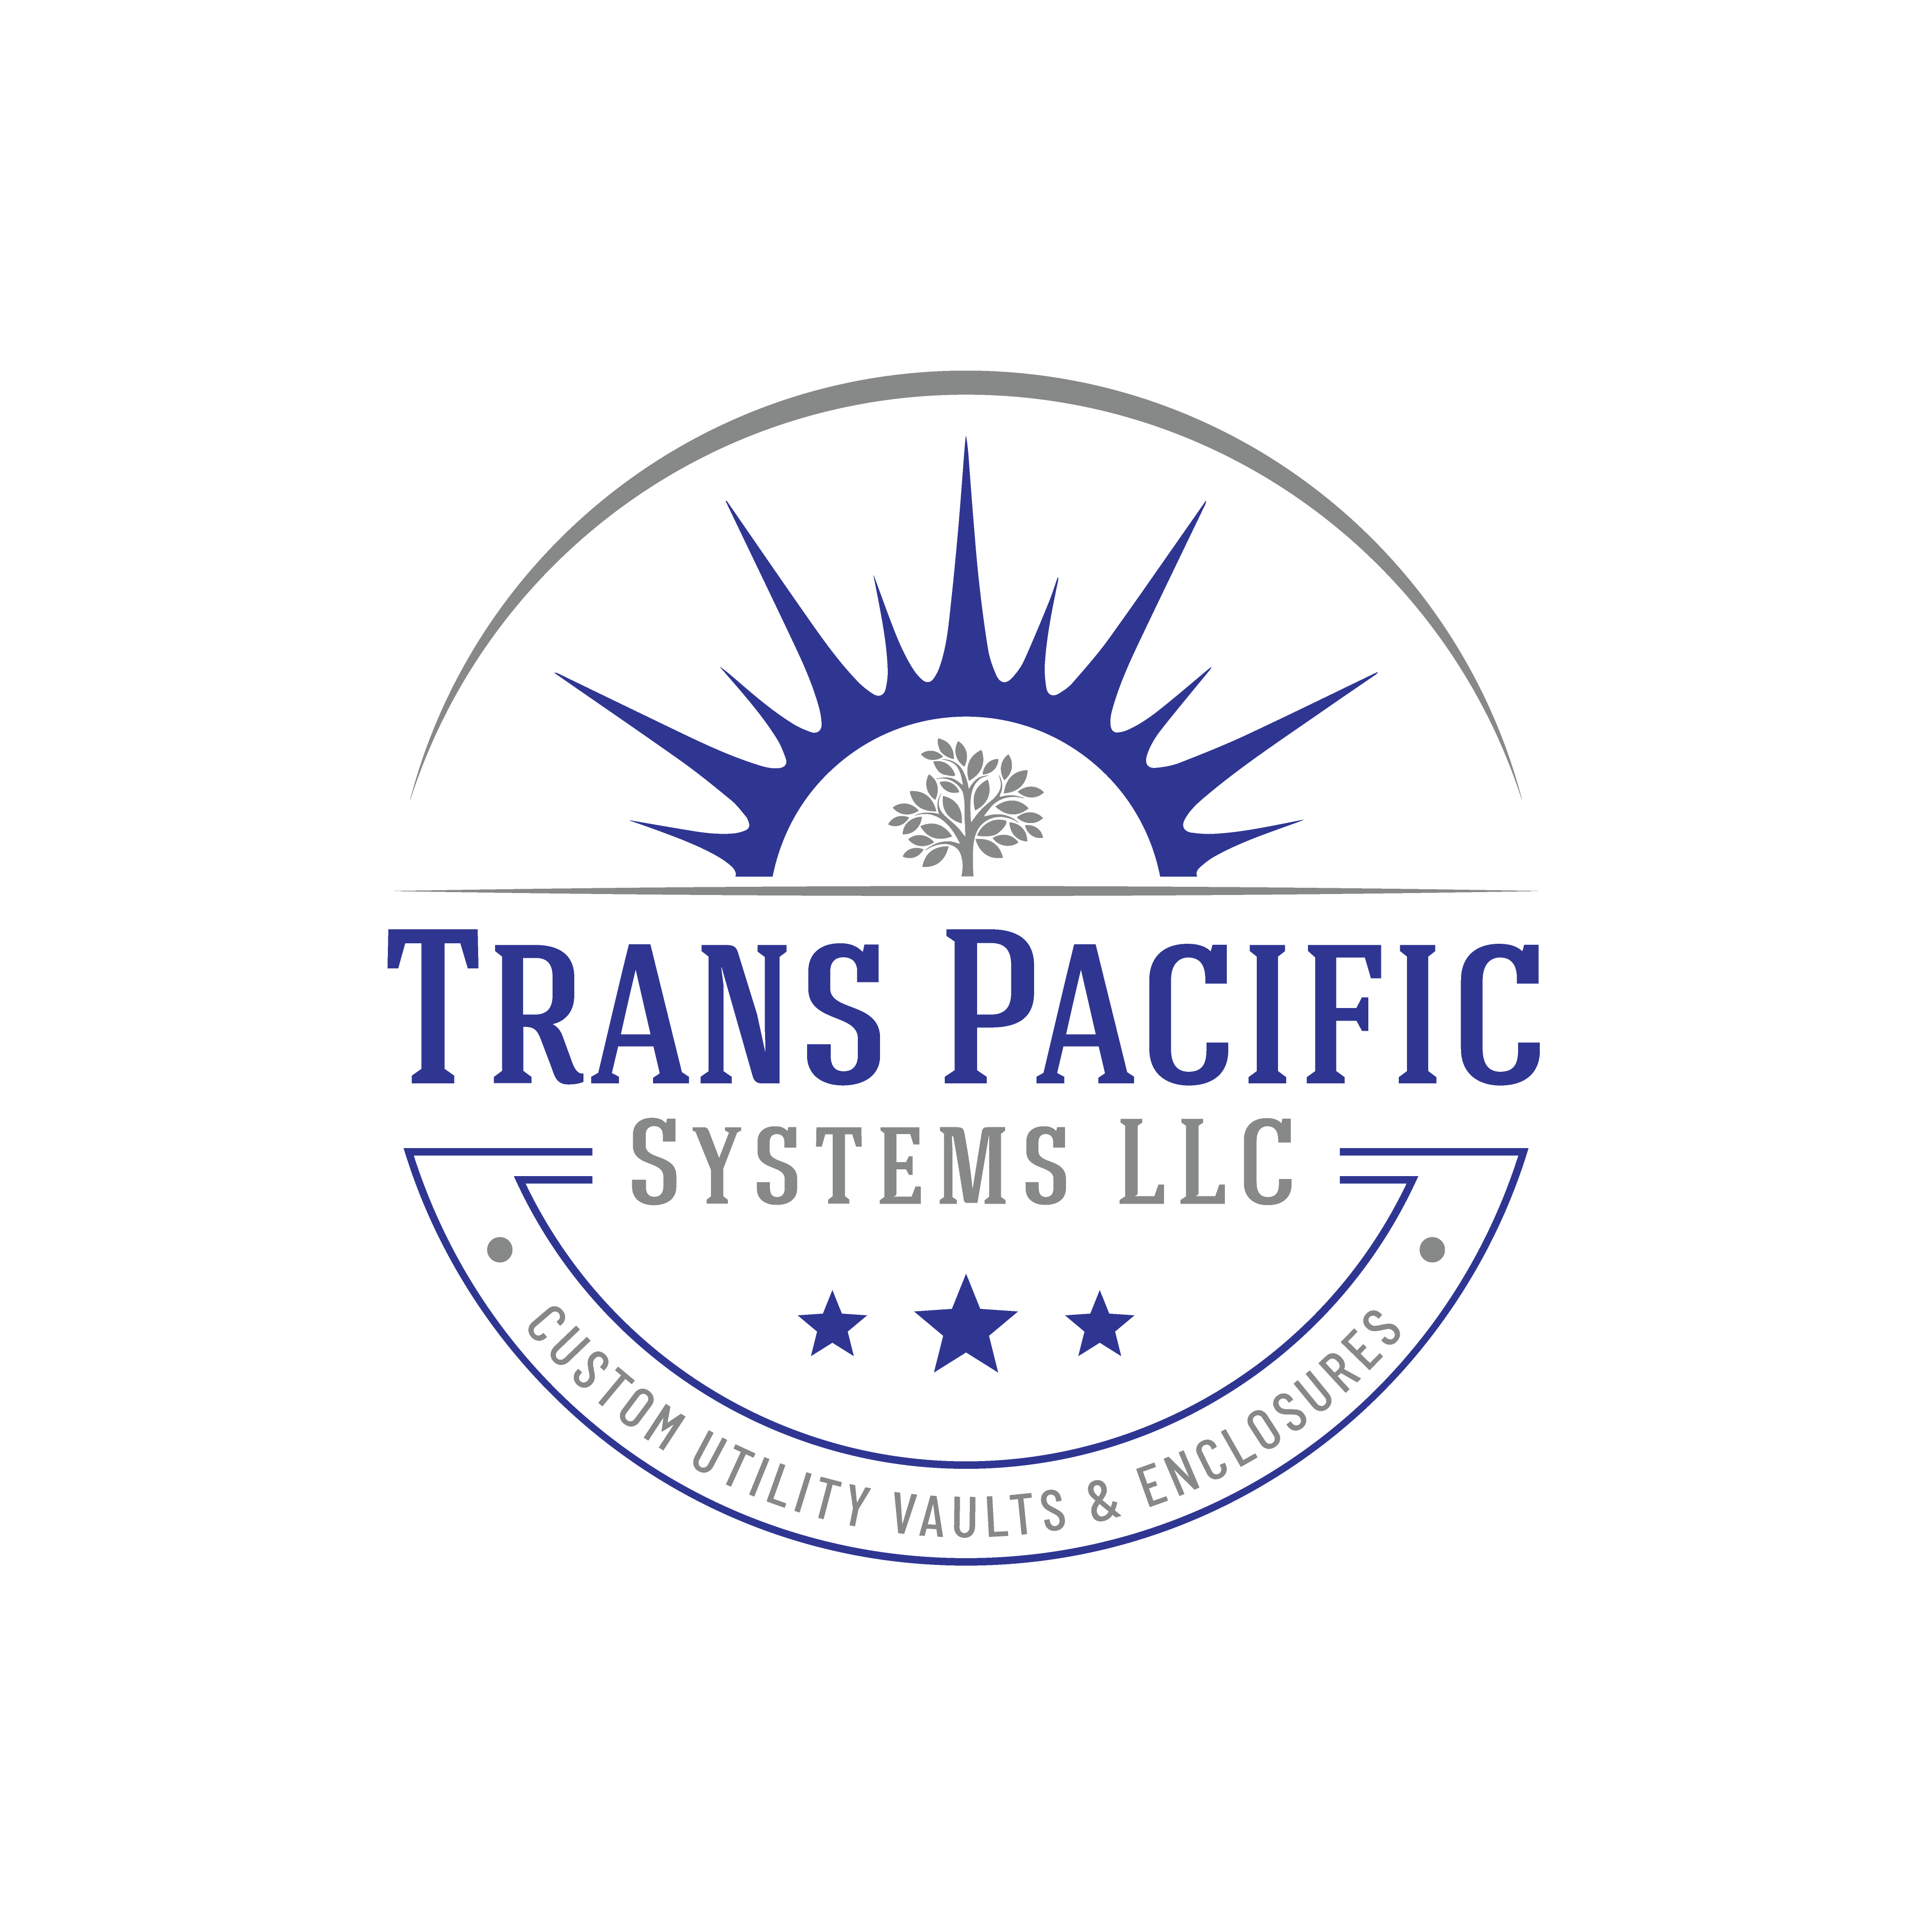 Trans Pacific Systems